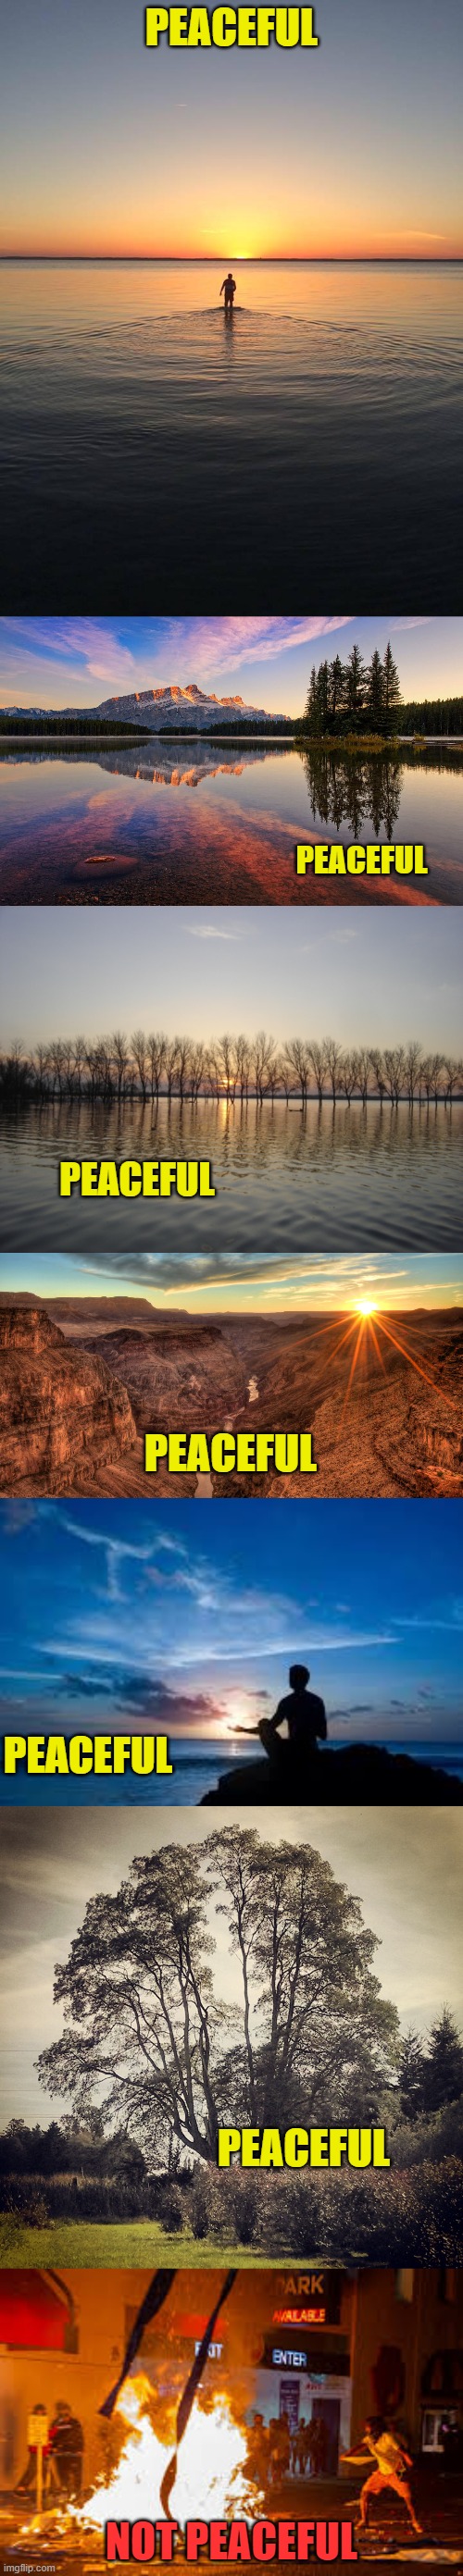 One of these things is not like the other. When did shouting and destruction become peaceful? | PEACEFUL; PEACEFUL; PEACEFUL; PEACEFUL; PEACEFUL; PEACEFUL; NOT PEACEFUL | image tagged in tree quote inspirational,peace on water,serenity,the grand canyon,inspirational man,serene | made w/ Imgflip meme maker